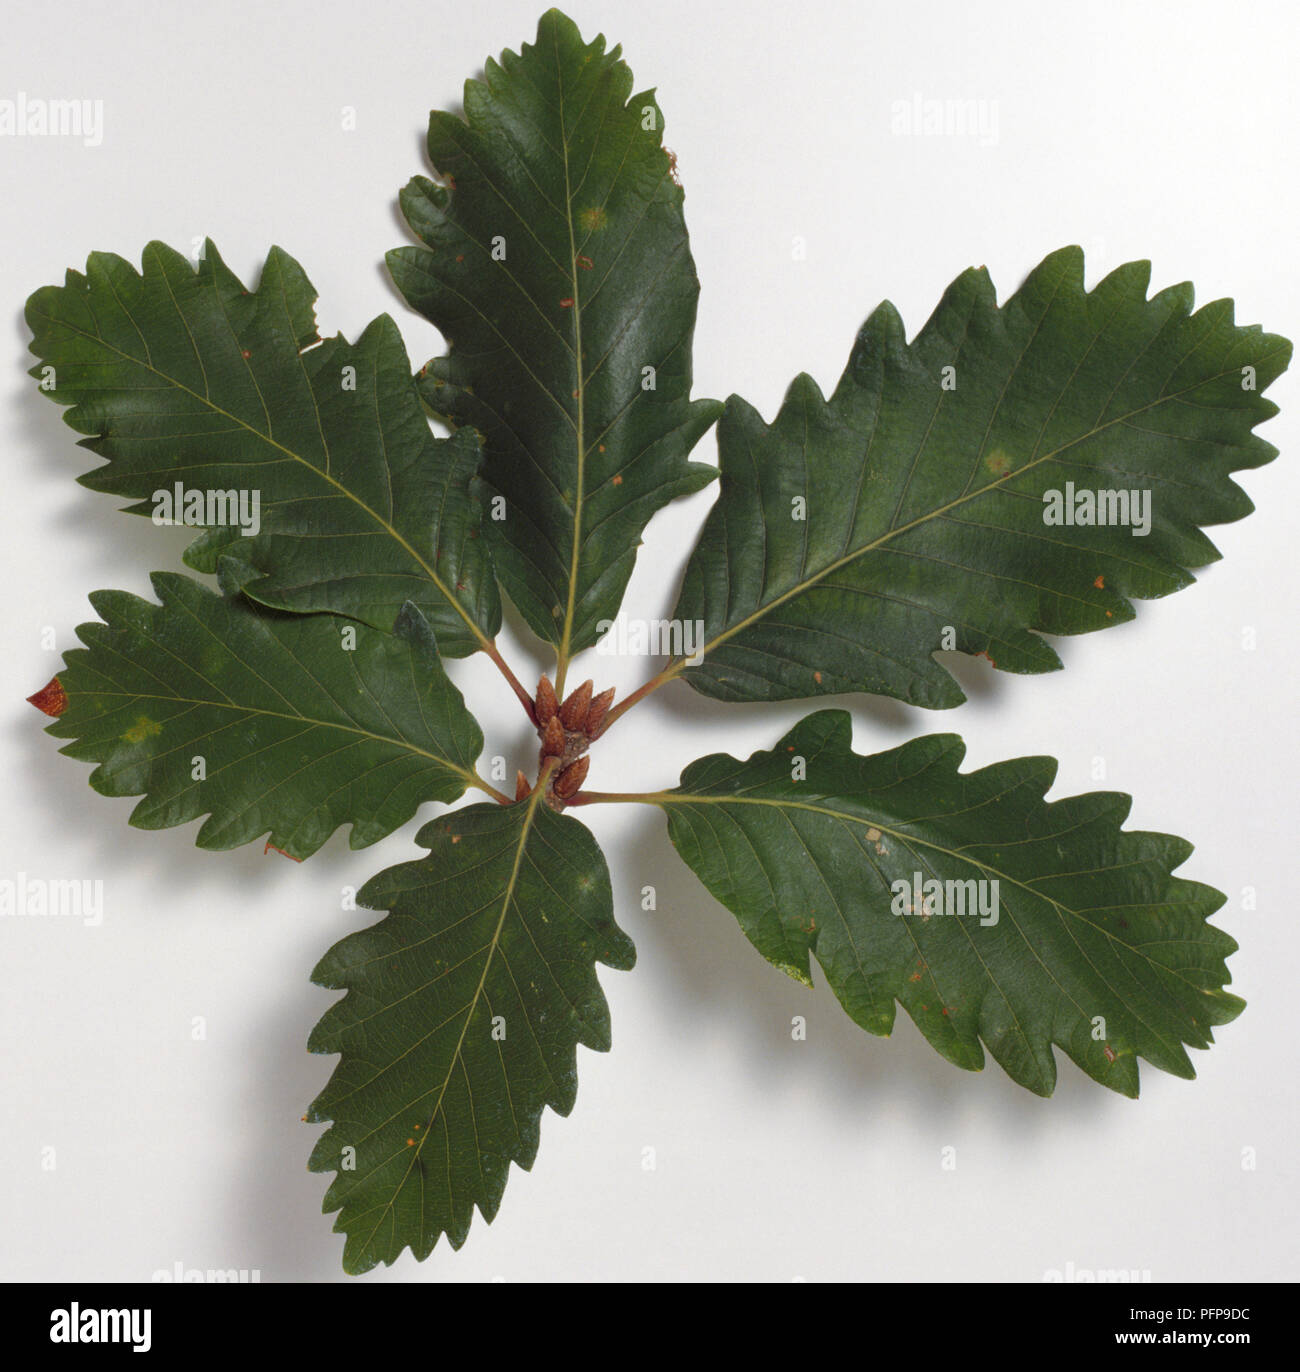 Fagaceae, Quercus canariensis, Algerian Oak, dark, smooth, obovate leaves with prominent lobes, above view. Stock Photo